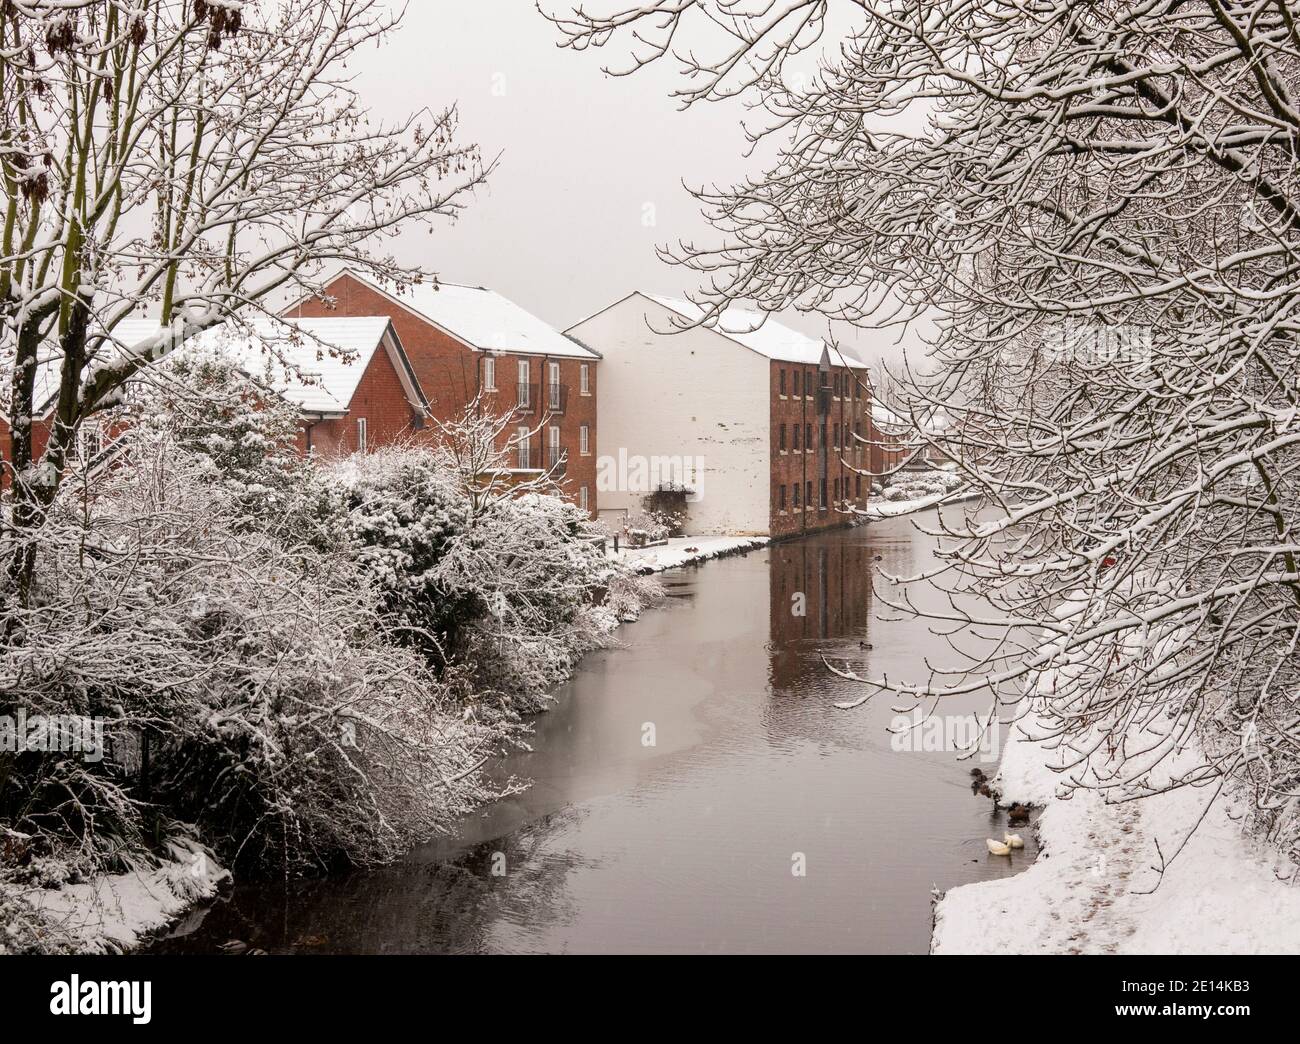 UK, England, Cheshire, Congleton, Mossley, Macclesfield Canal, Old Wharf in winter Stock Photo